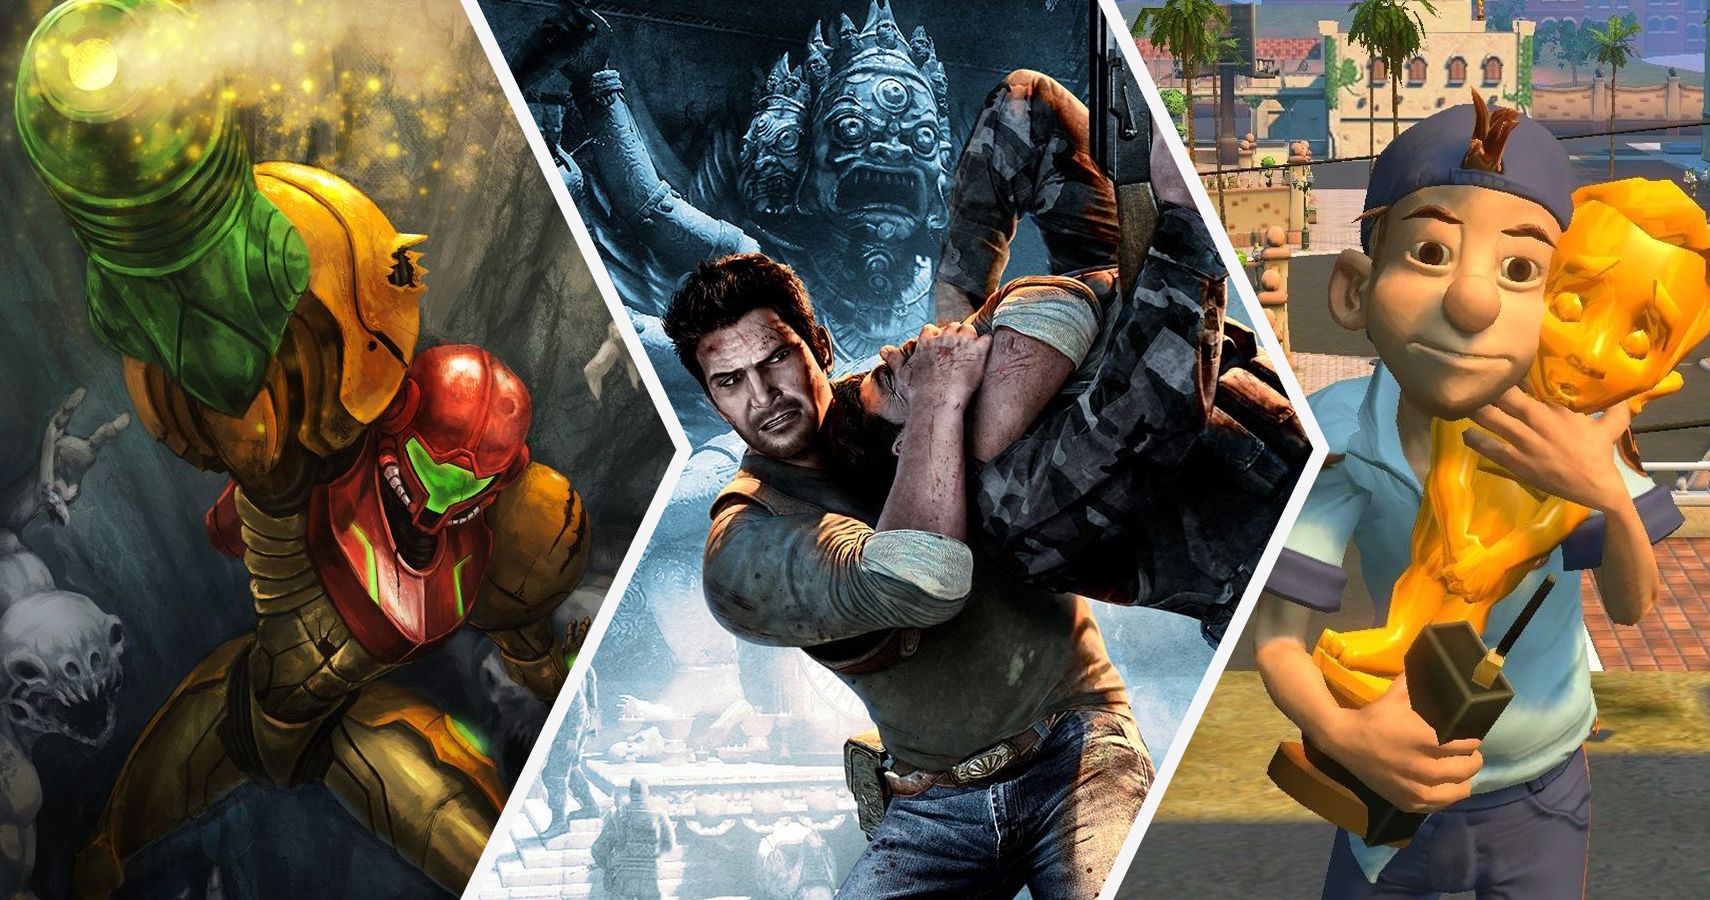 10 Best Video Games Of All Time, According To Metacritic